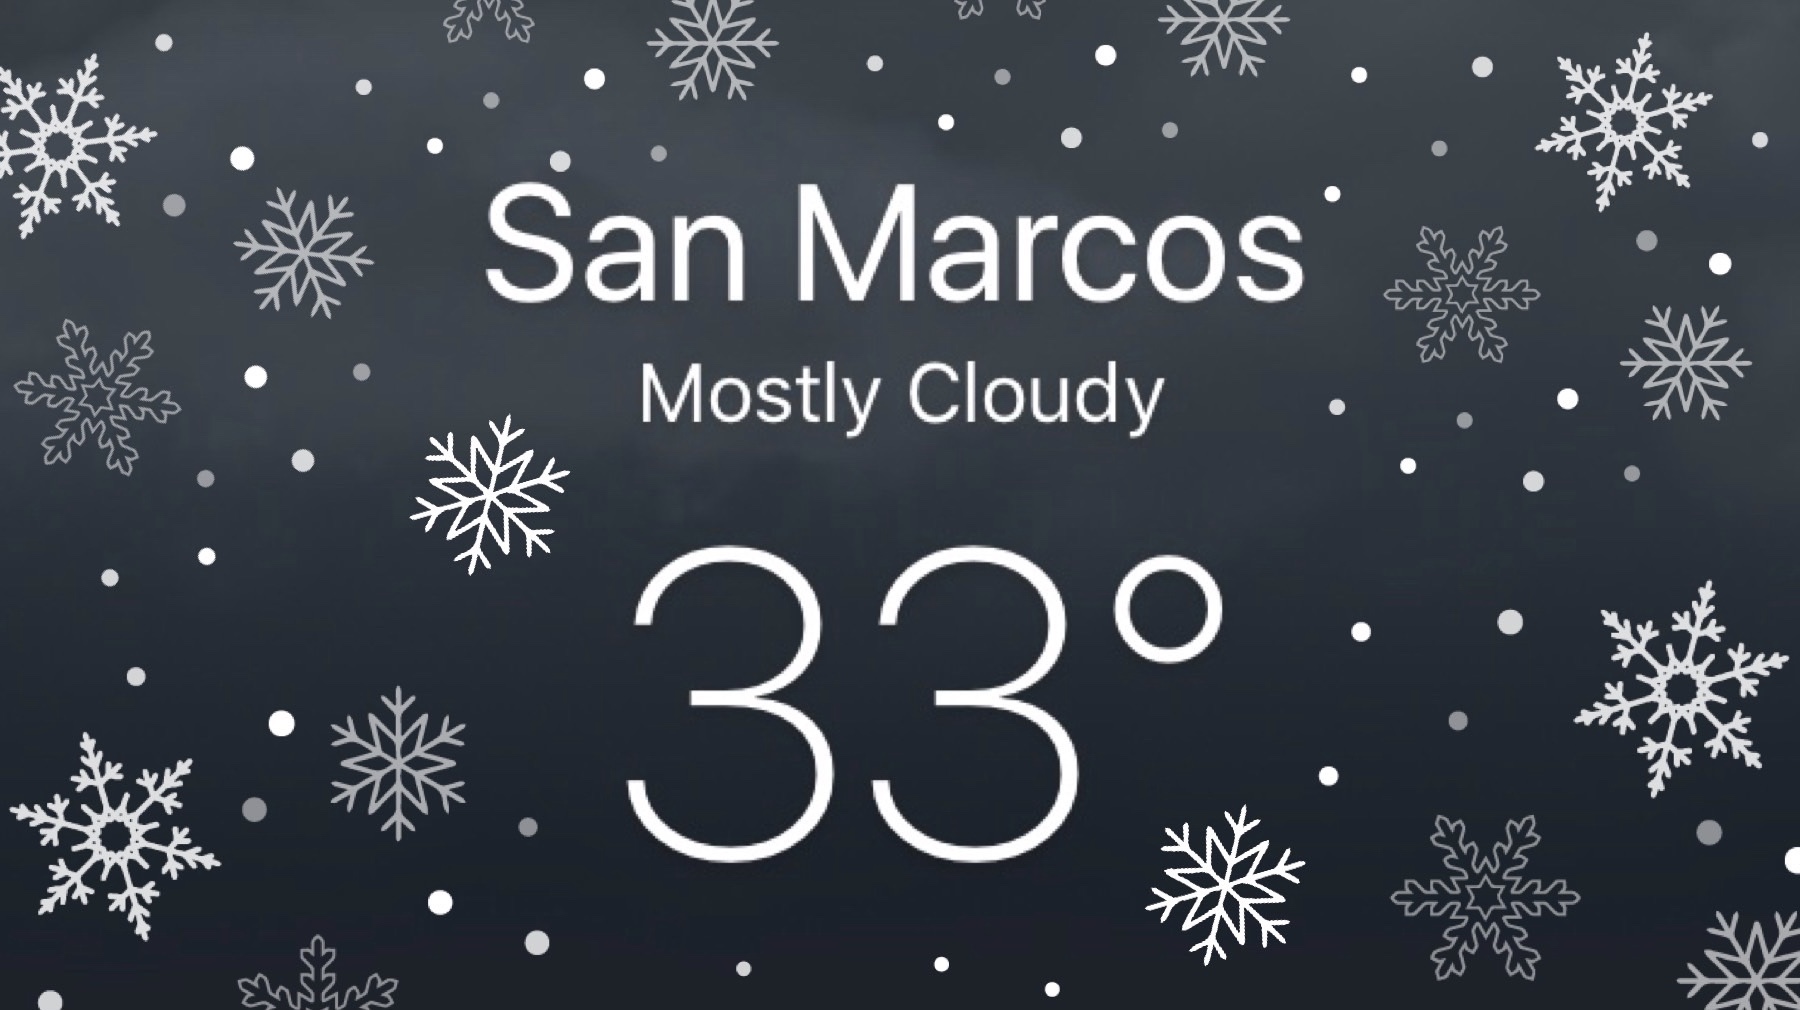 A screenshot of the weather and temperature in San Marcos (Mostly Cloudy, 33 degrees) with snow flurries and snowflakes falling around.